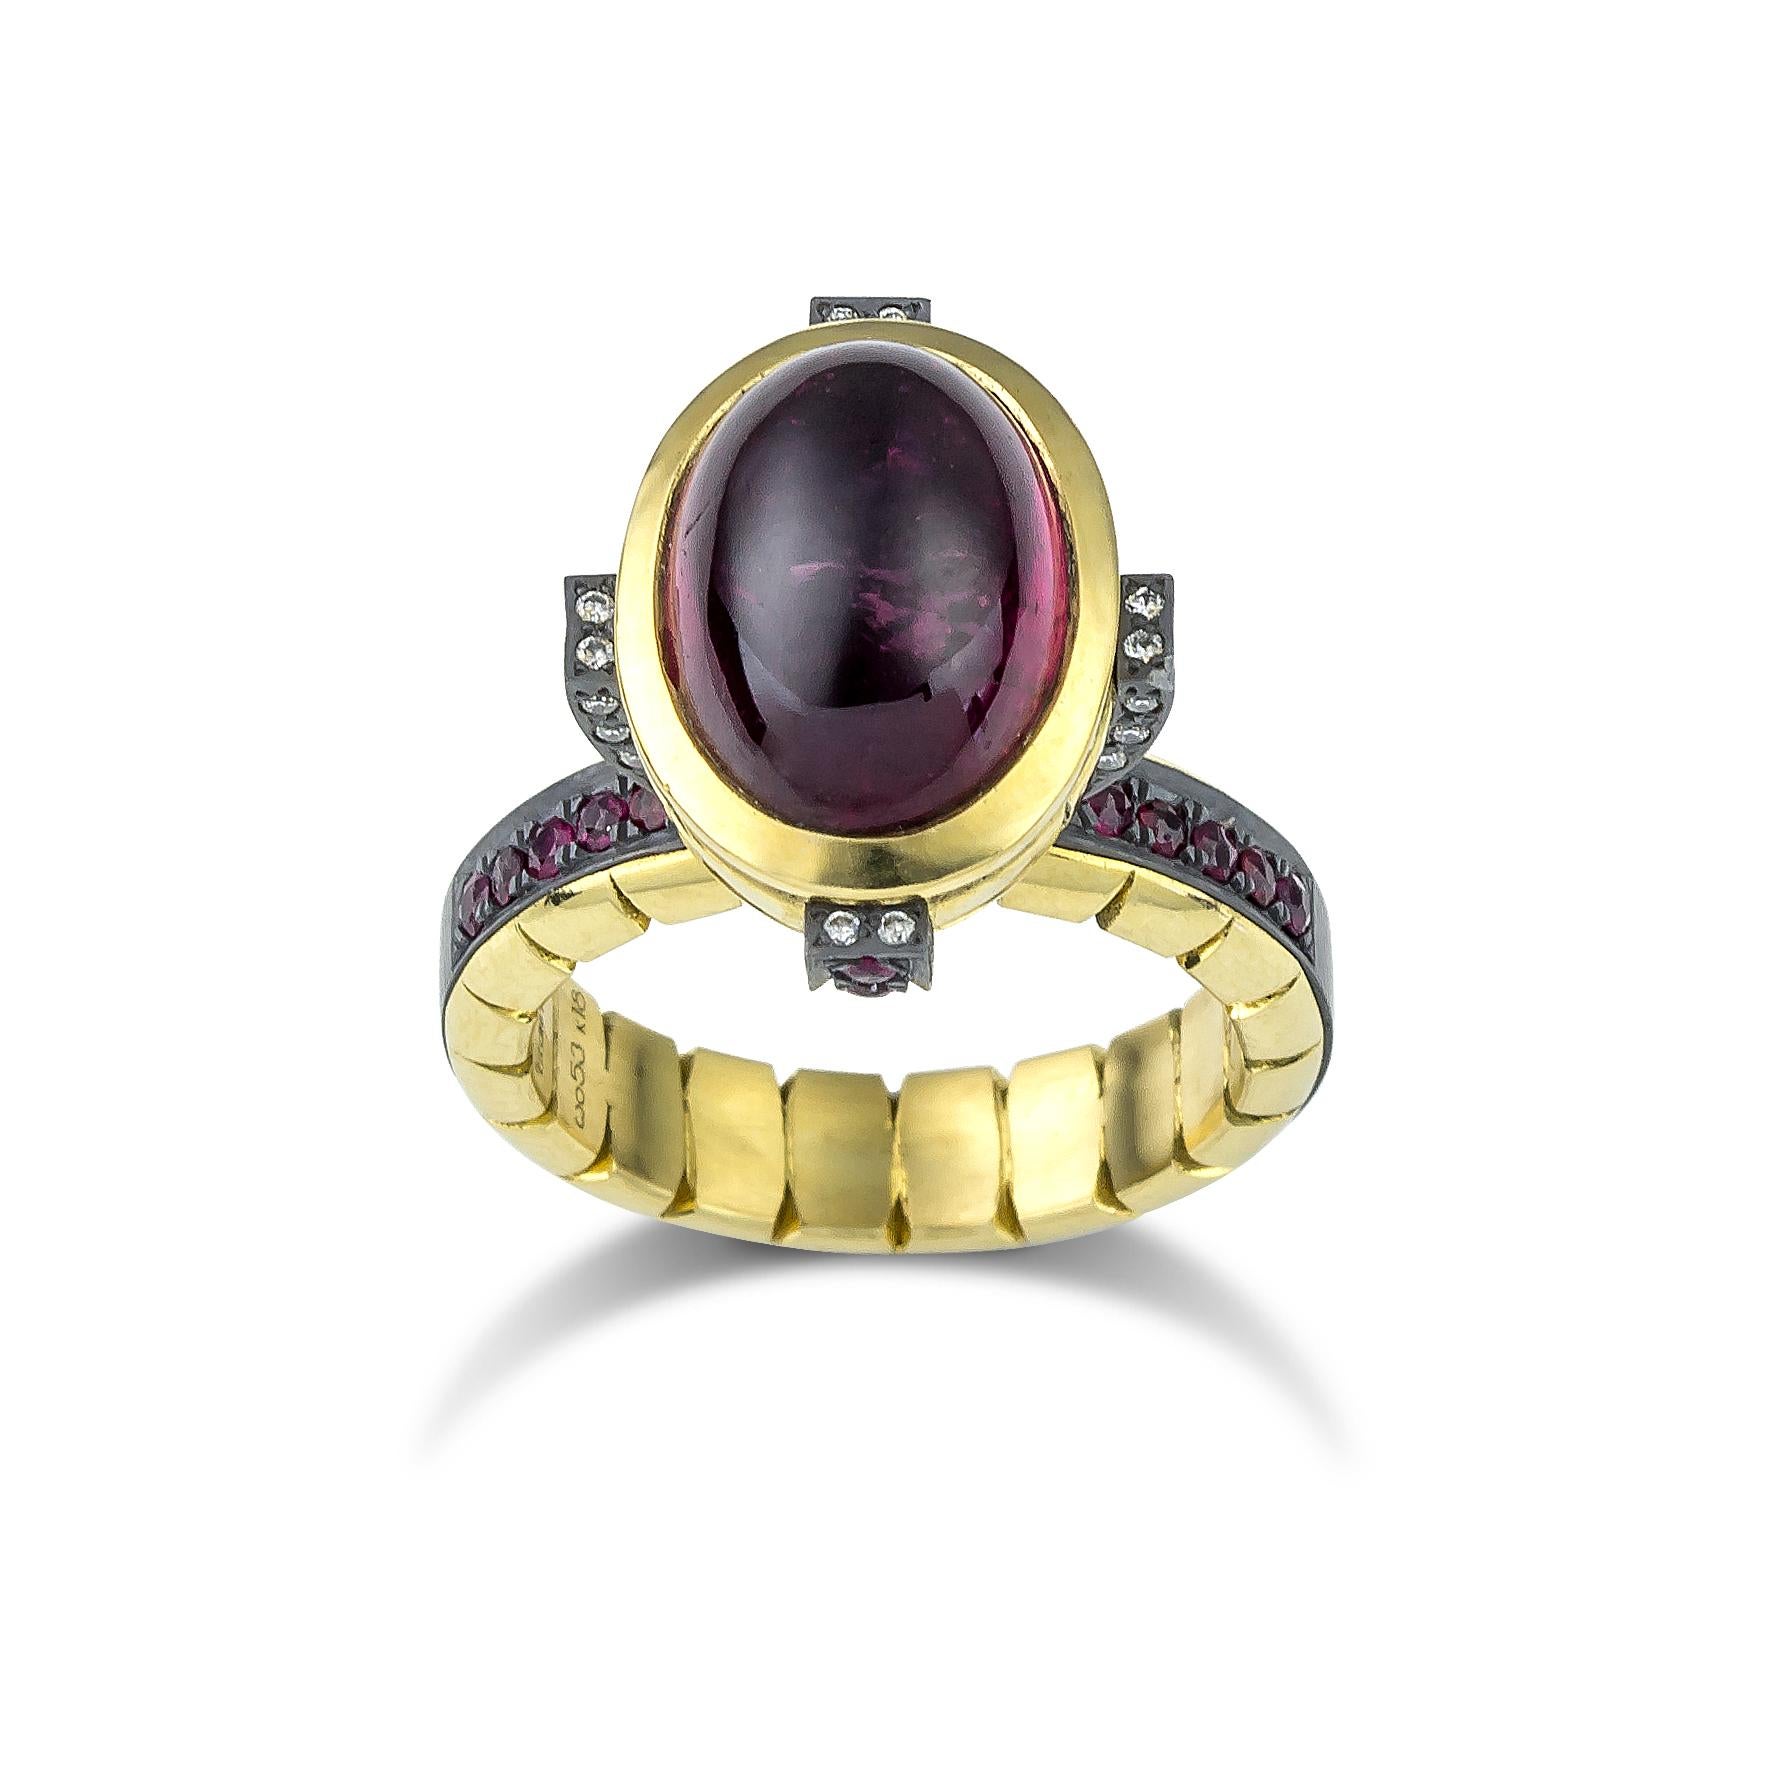 Tourmaline Cocktail Ring by Vasilis Giampouras at Second Petale Gallery
The oval tourmaline takes center stage, exuding its captivating charm and radiance. The rubies and diamonds add a touch of fiery brilliance and timeless elegance. Each gemstone